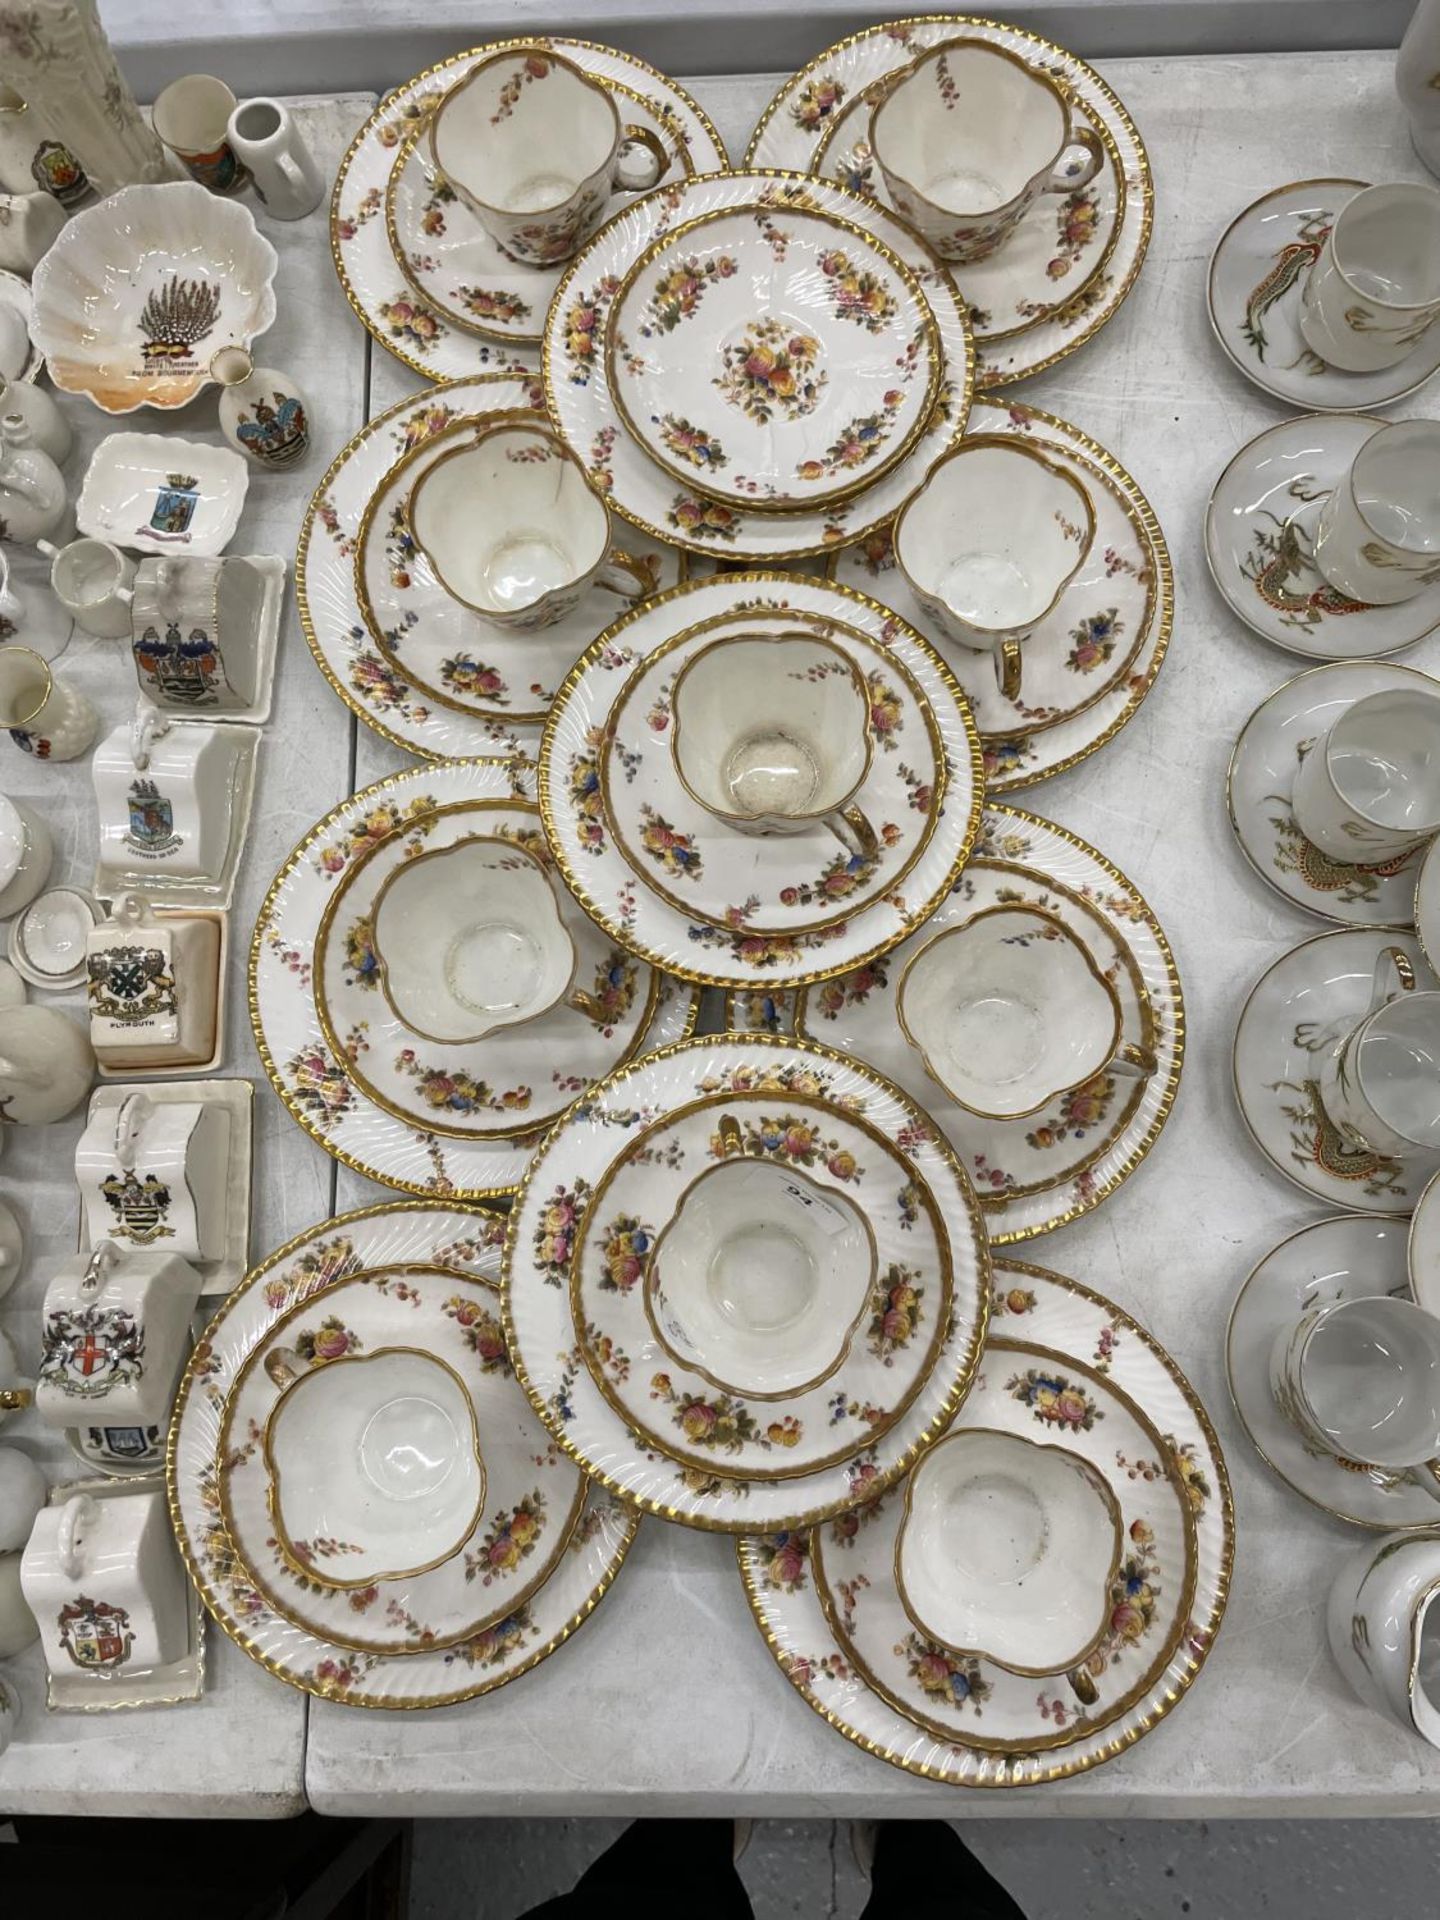 A COLLECTION OF CIRCA LATE 1800'S/EARLY 19TH CENTURY CHINA CUPS, SAUCERS AND PLATES DECORATED WITH - Image 2 of 6